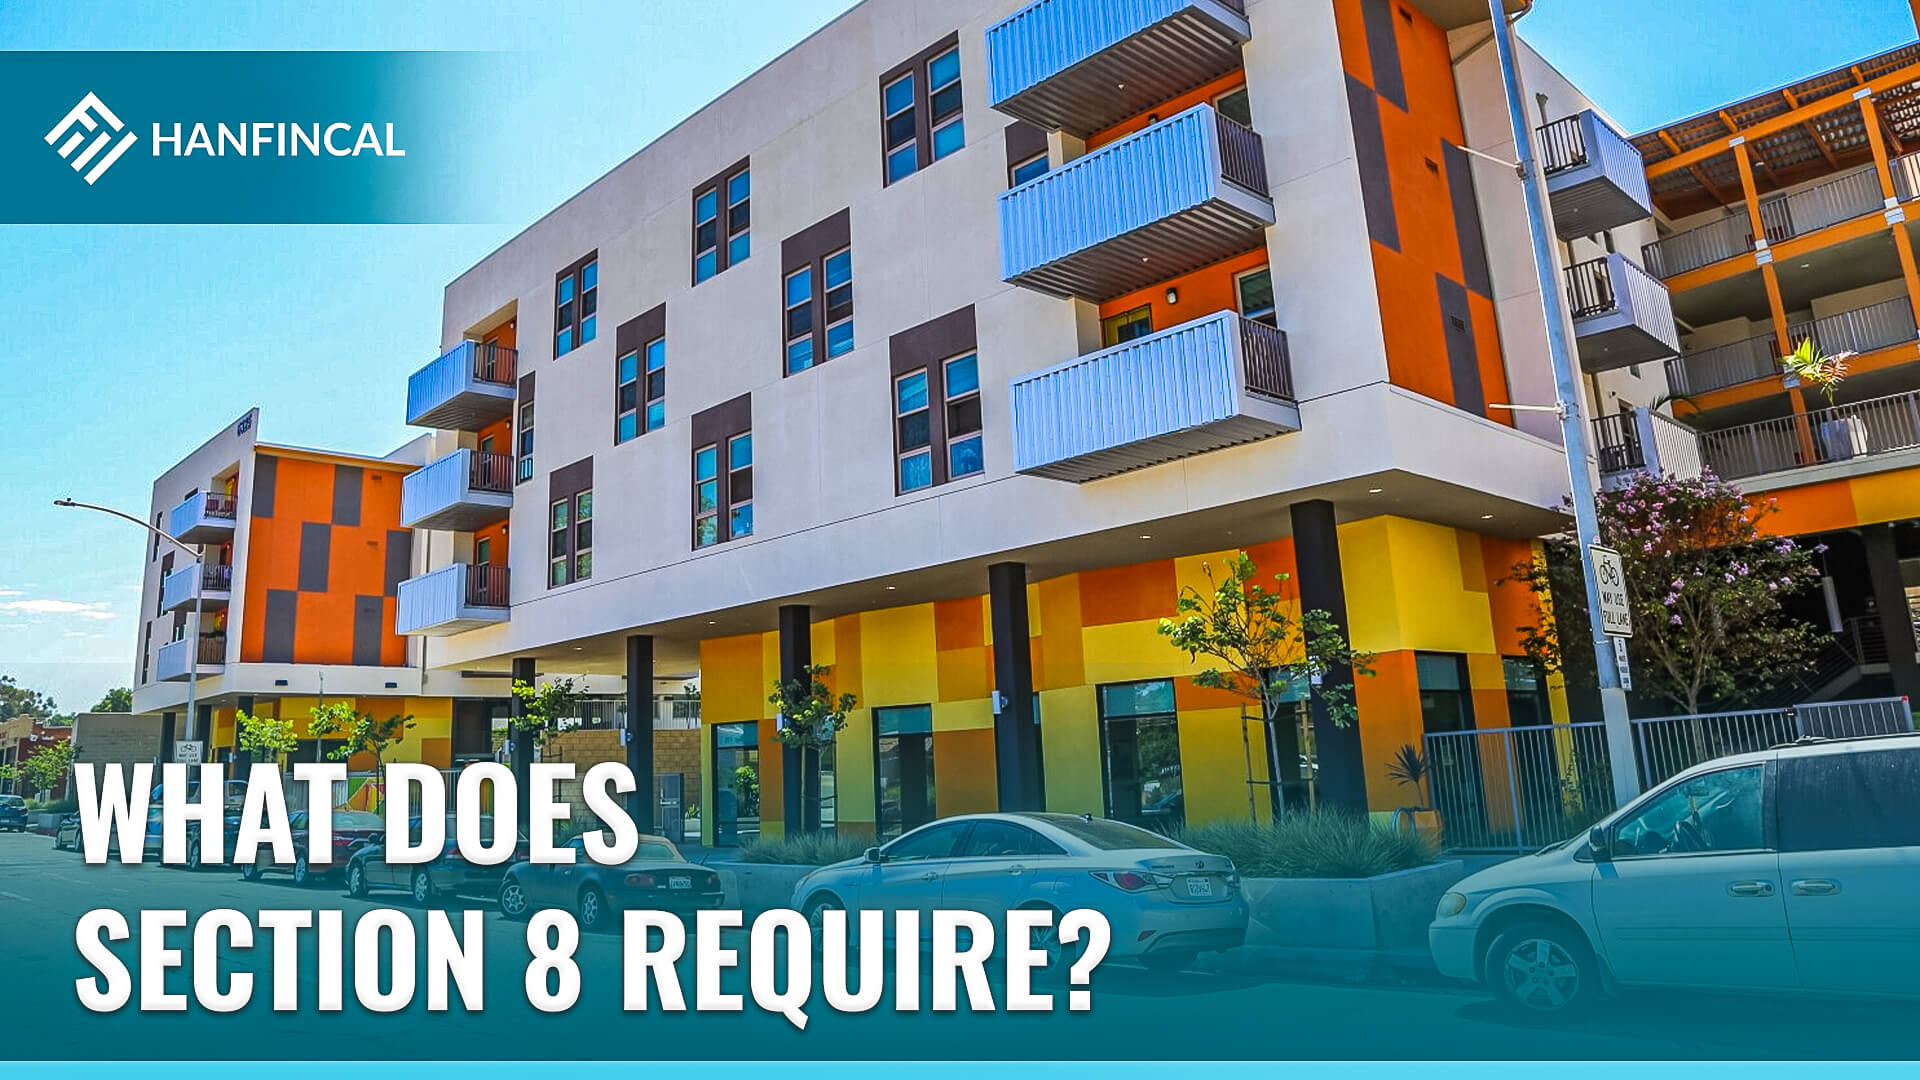 How to qualify for Section 8 in San Diego?